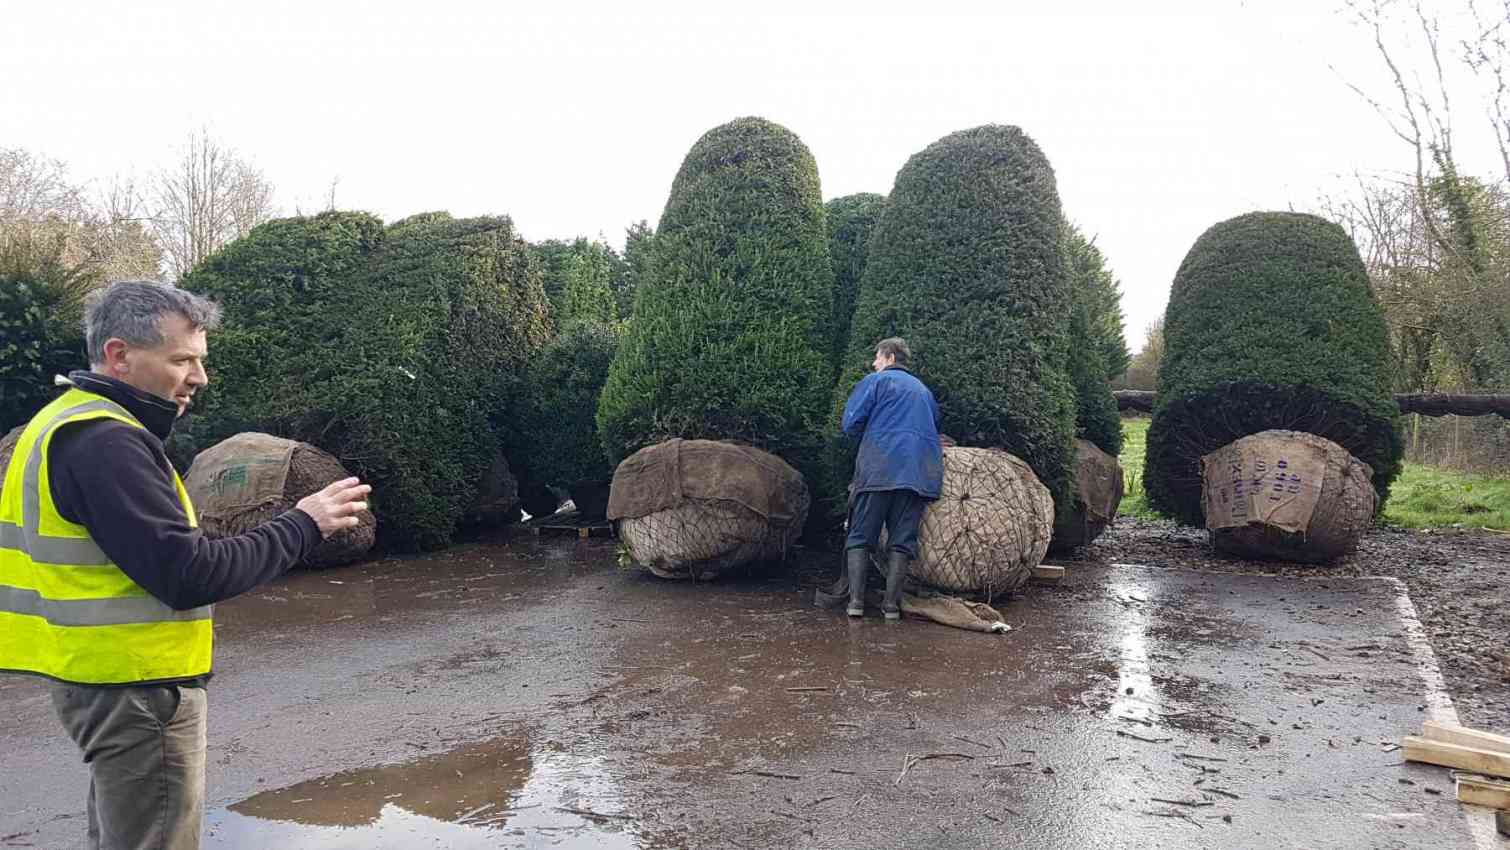 Yew columns and beehive topiary plants at Kingsdown